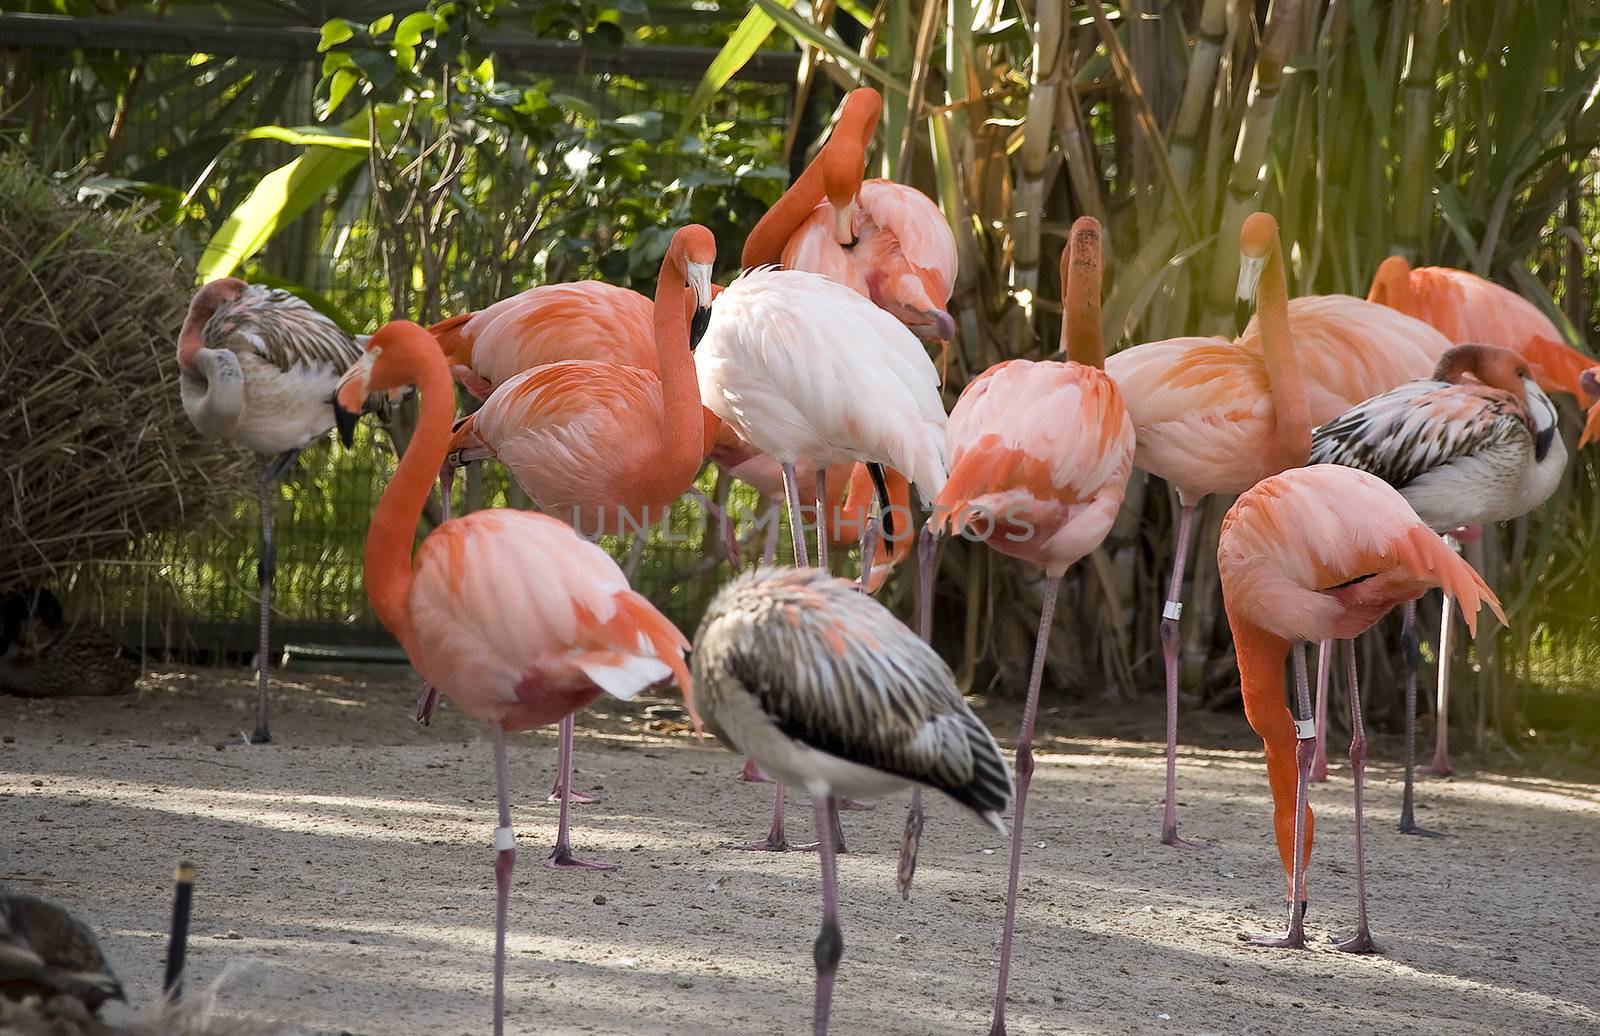 Flamingos in the Zoo by KevinPanizza